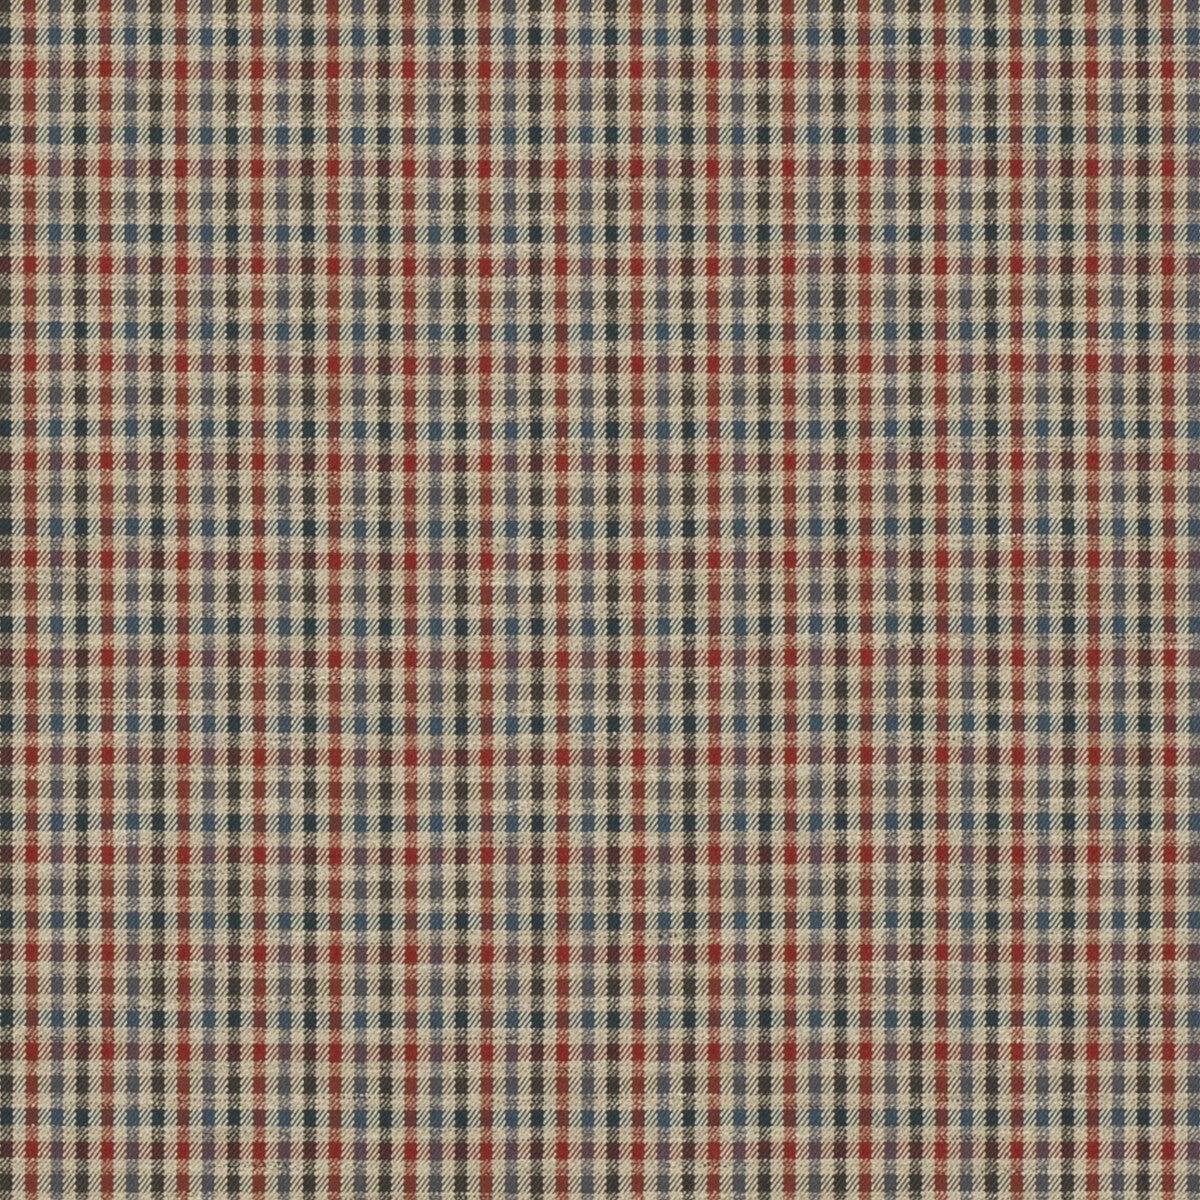 Babington Check fabric in red/blue color - pattern FD810.V110.0 - by Mulberry in the Icons Fabrics collection